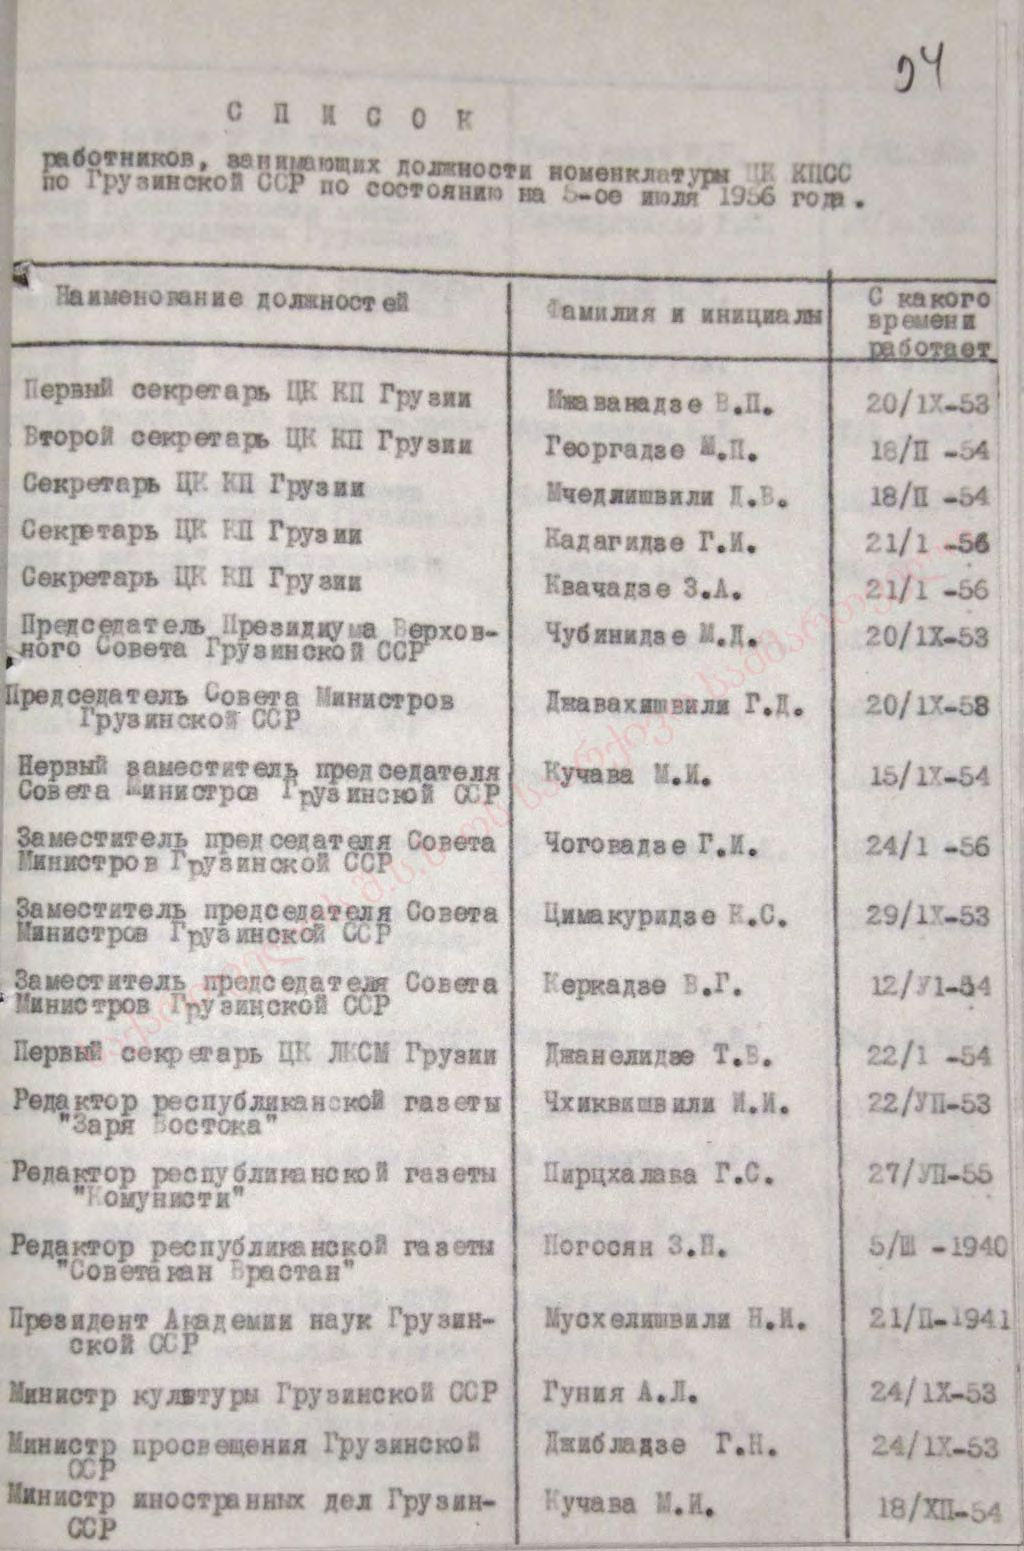 List of the officials that worked in Georgia in the nomenclature of Central Committee of the Communist Party of the Soviet Union by July 5th 1956.  